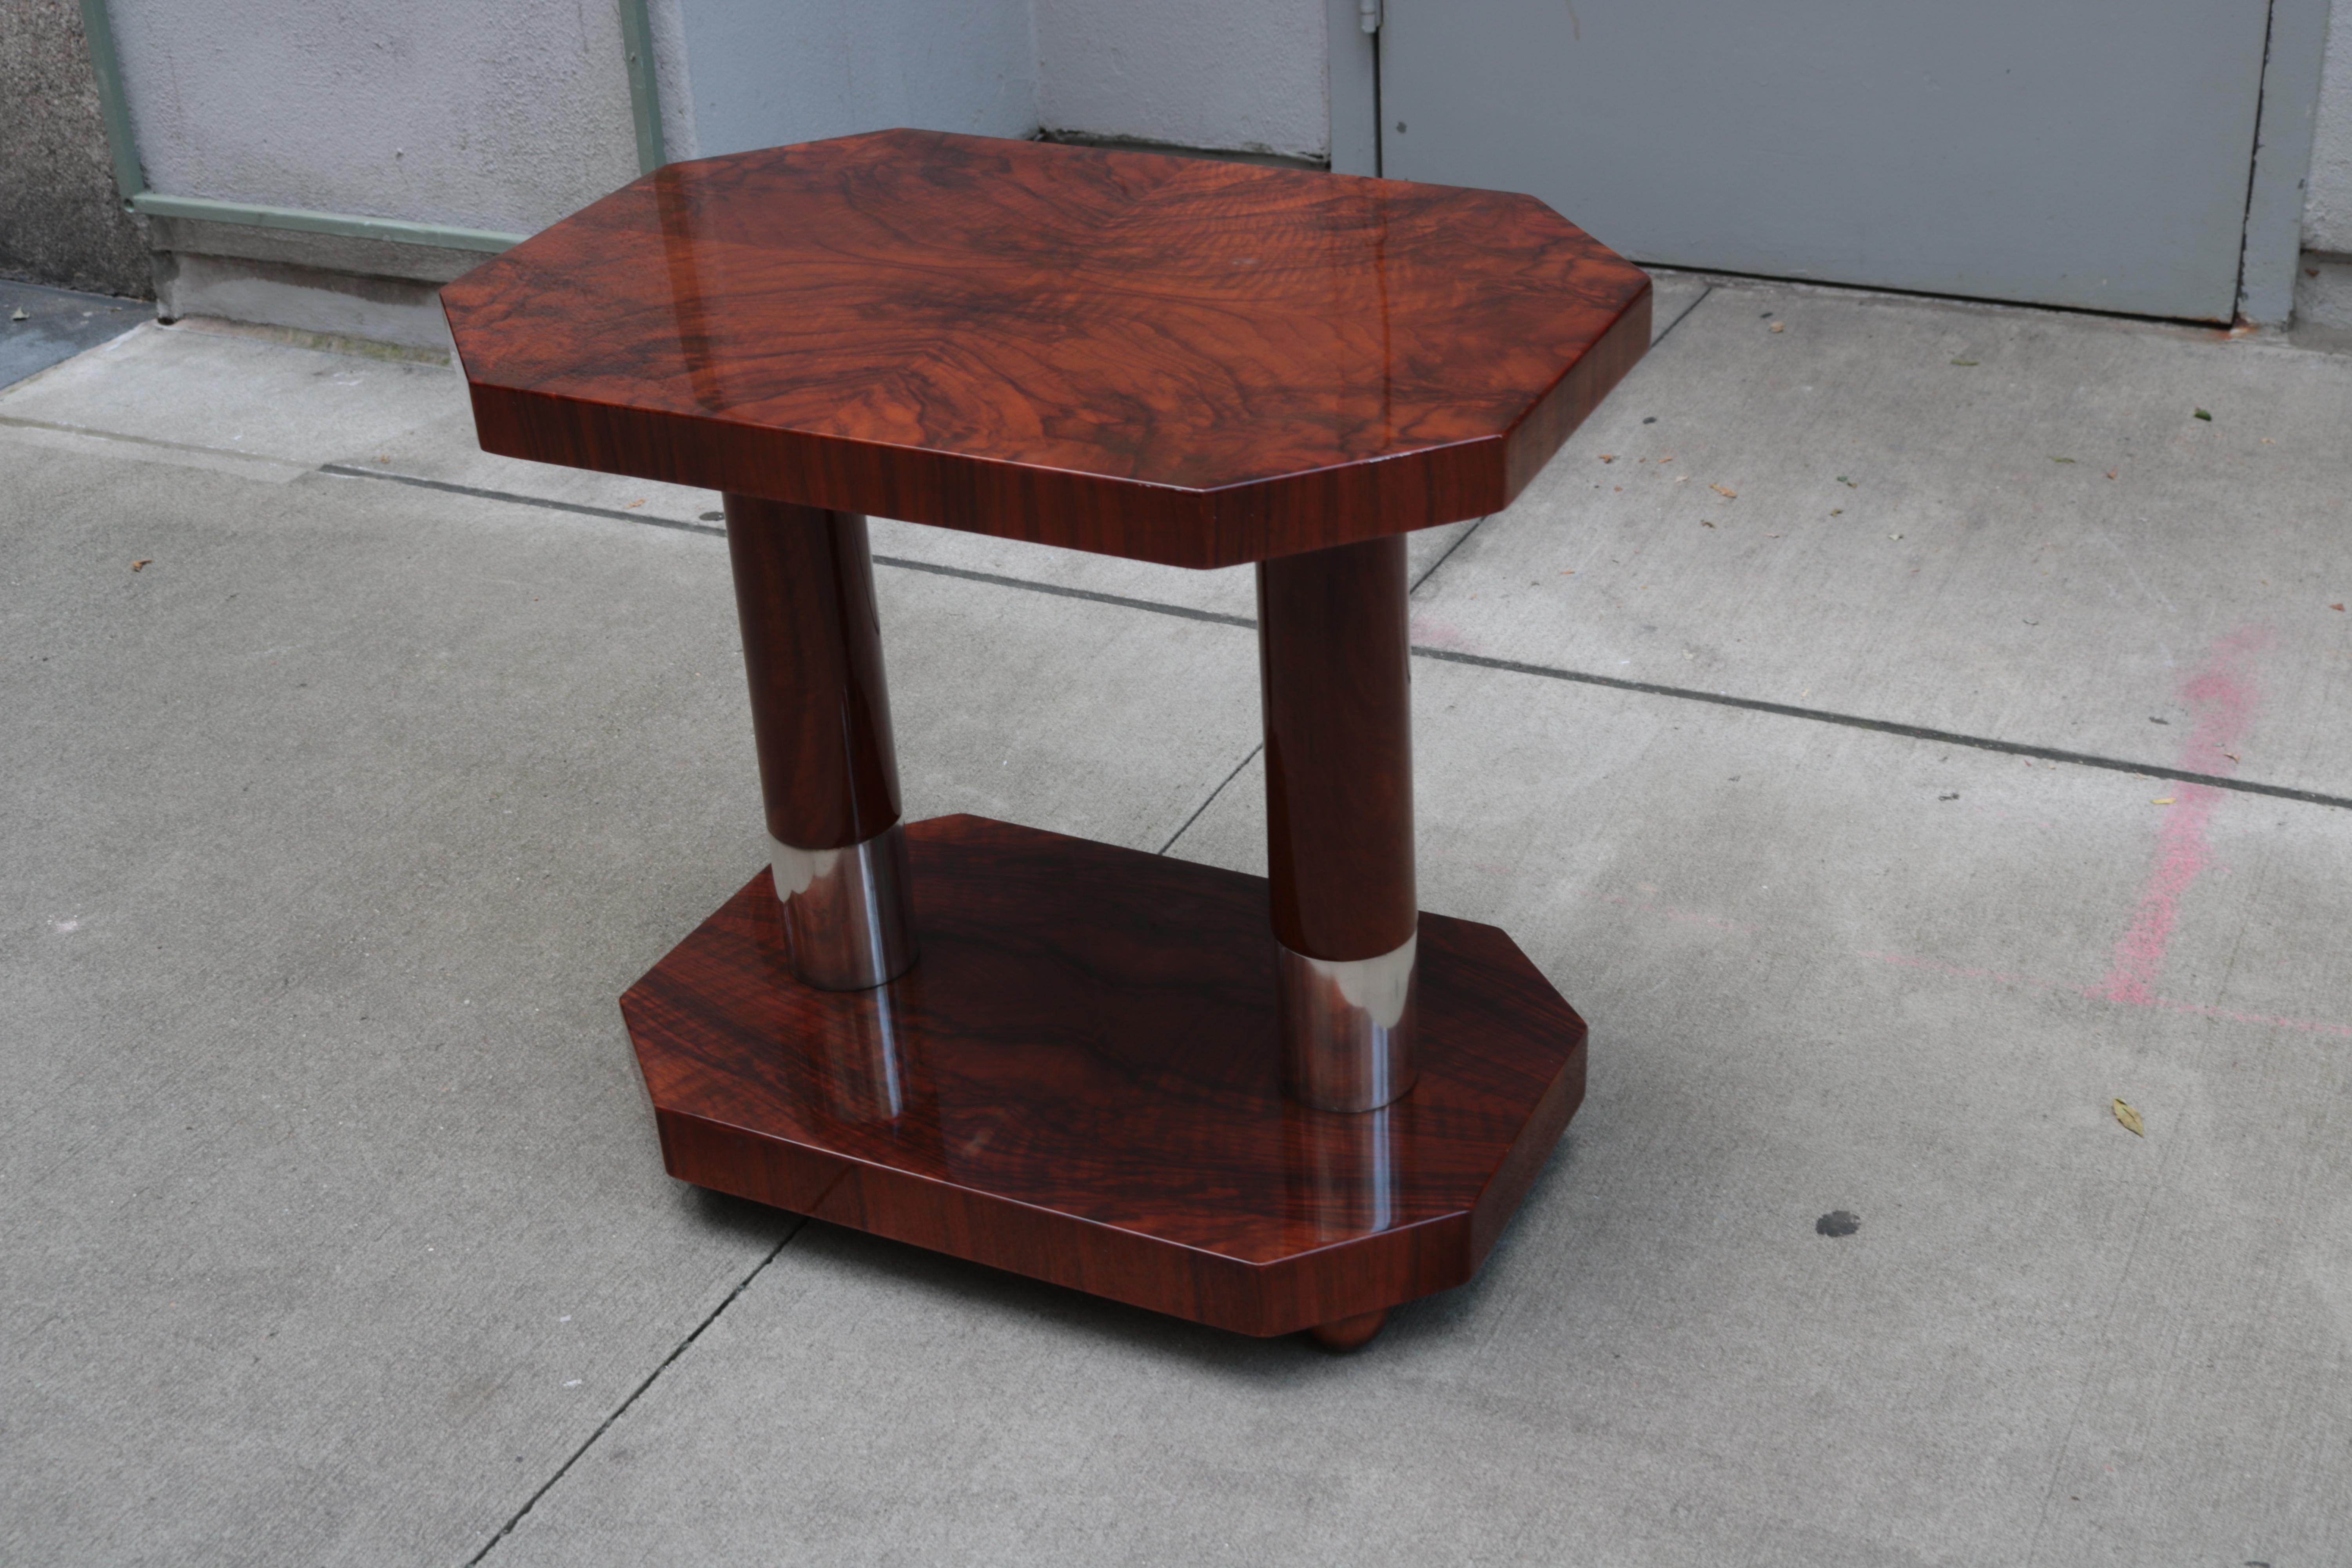 Contemporary two-tier side table with Art Deco inspired design.
Mahogany with nickel details.